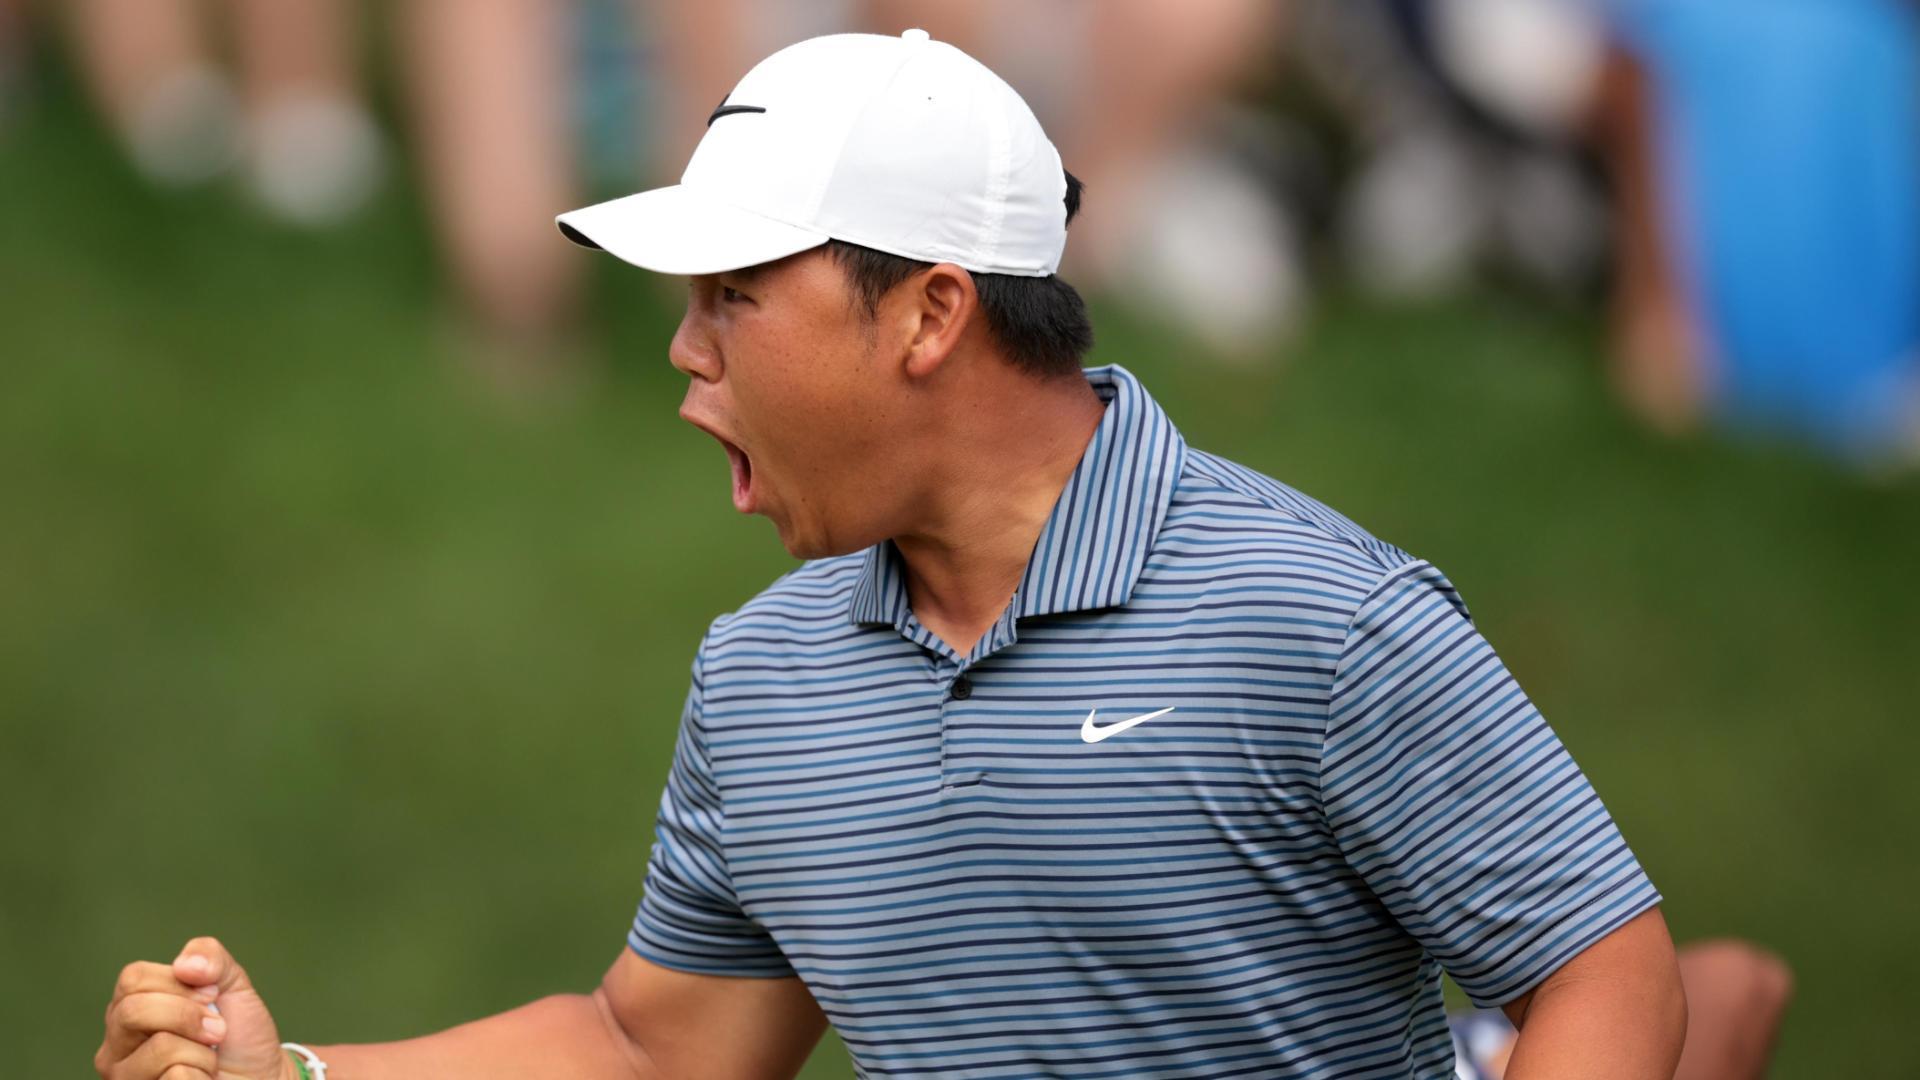 Tom Kim comes up clutch on final hole to send Travelers to playoff